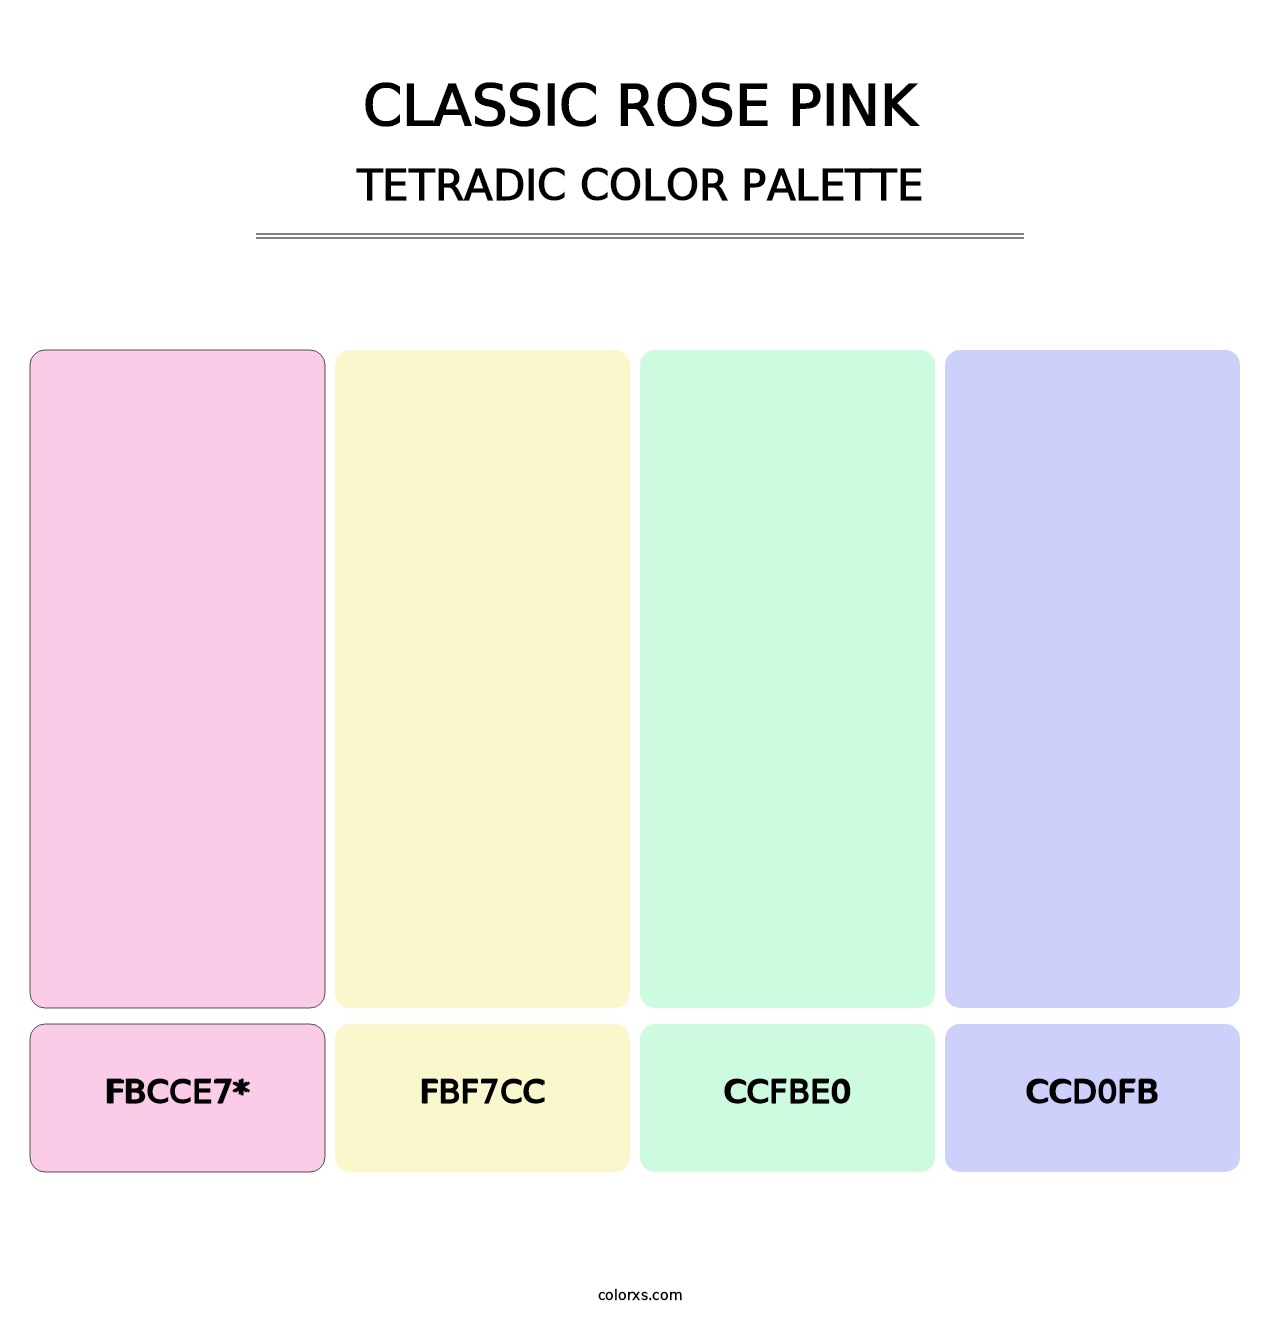 Classic Rose Pink - Tetradic Color Palette